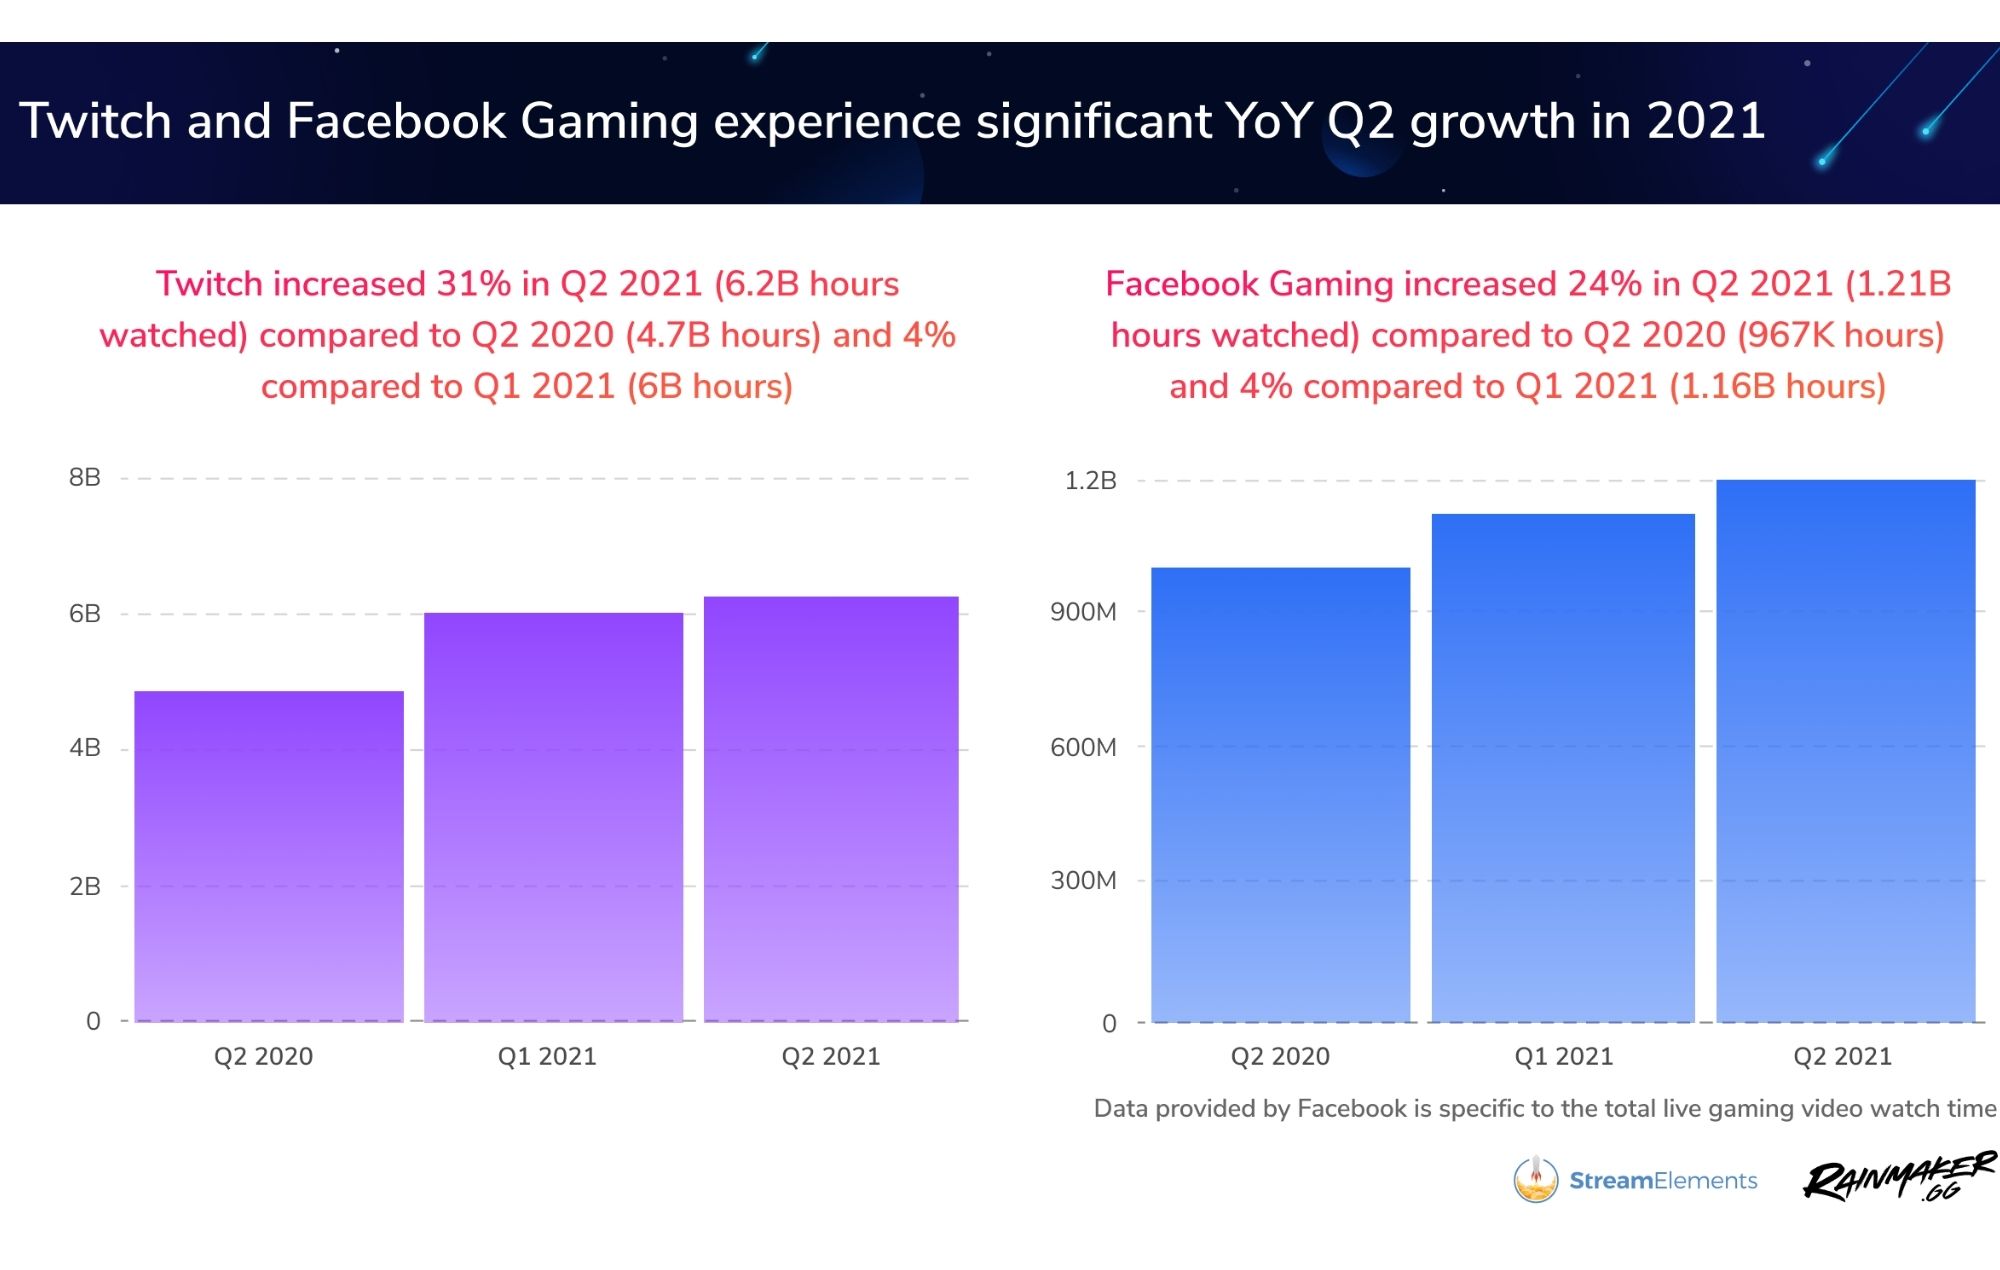 Twitch/Facebook gaming